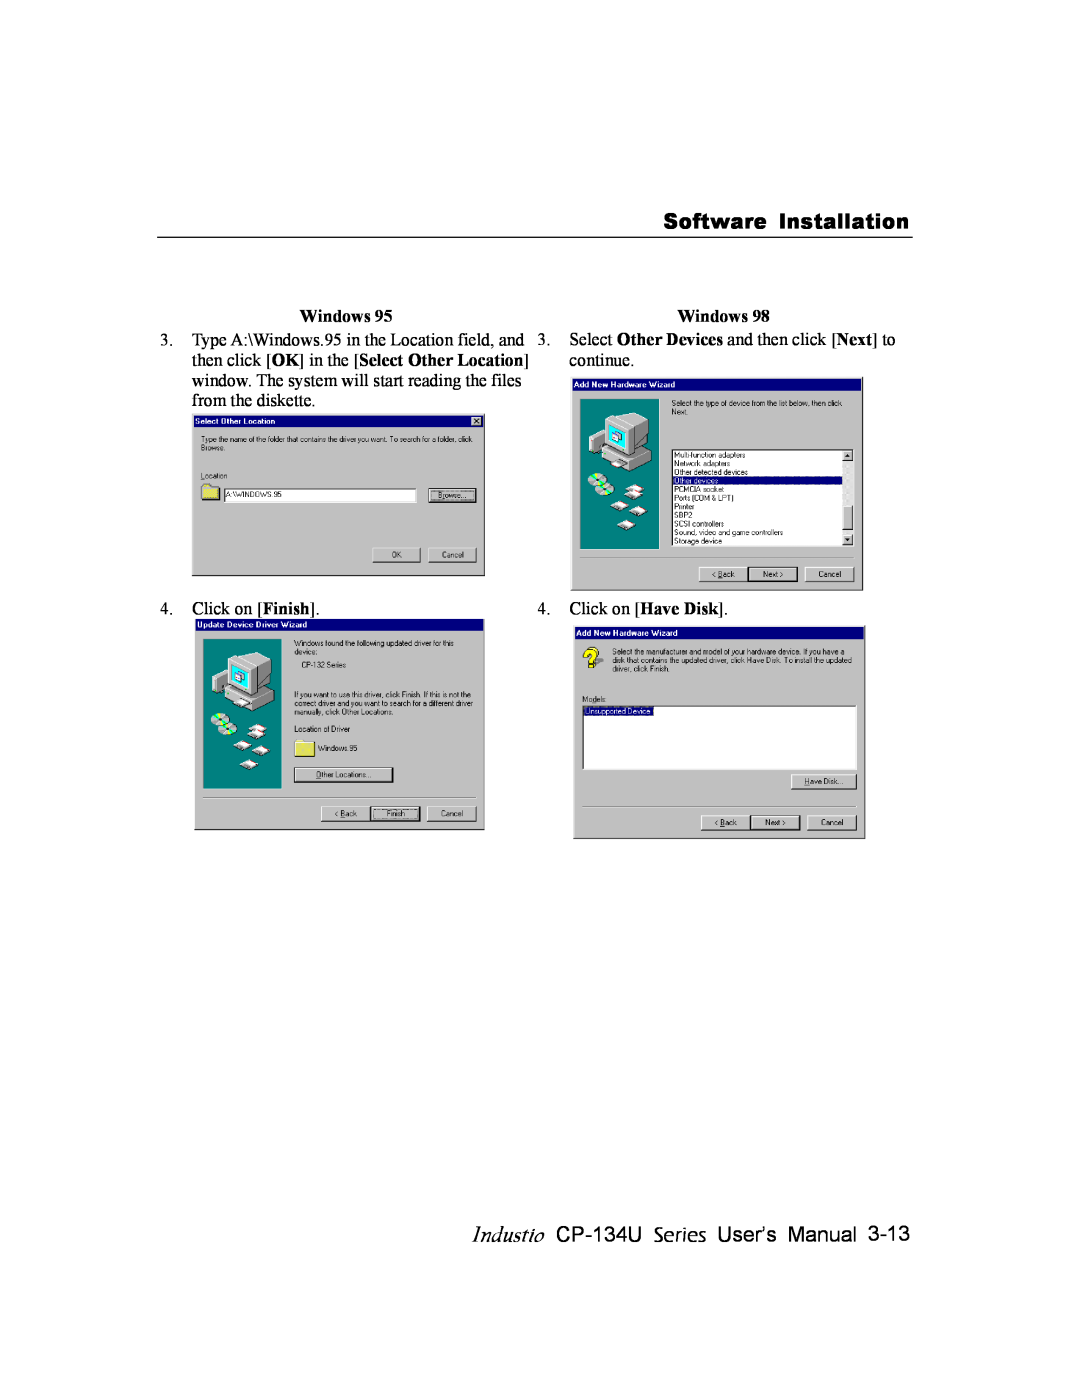 Moxa Technologies user manual Software Installation, Industio CP-134U Series User’s Manual, continue, from the diskette 